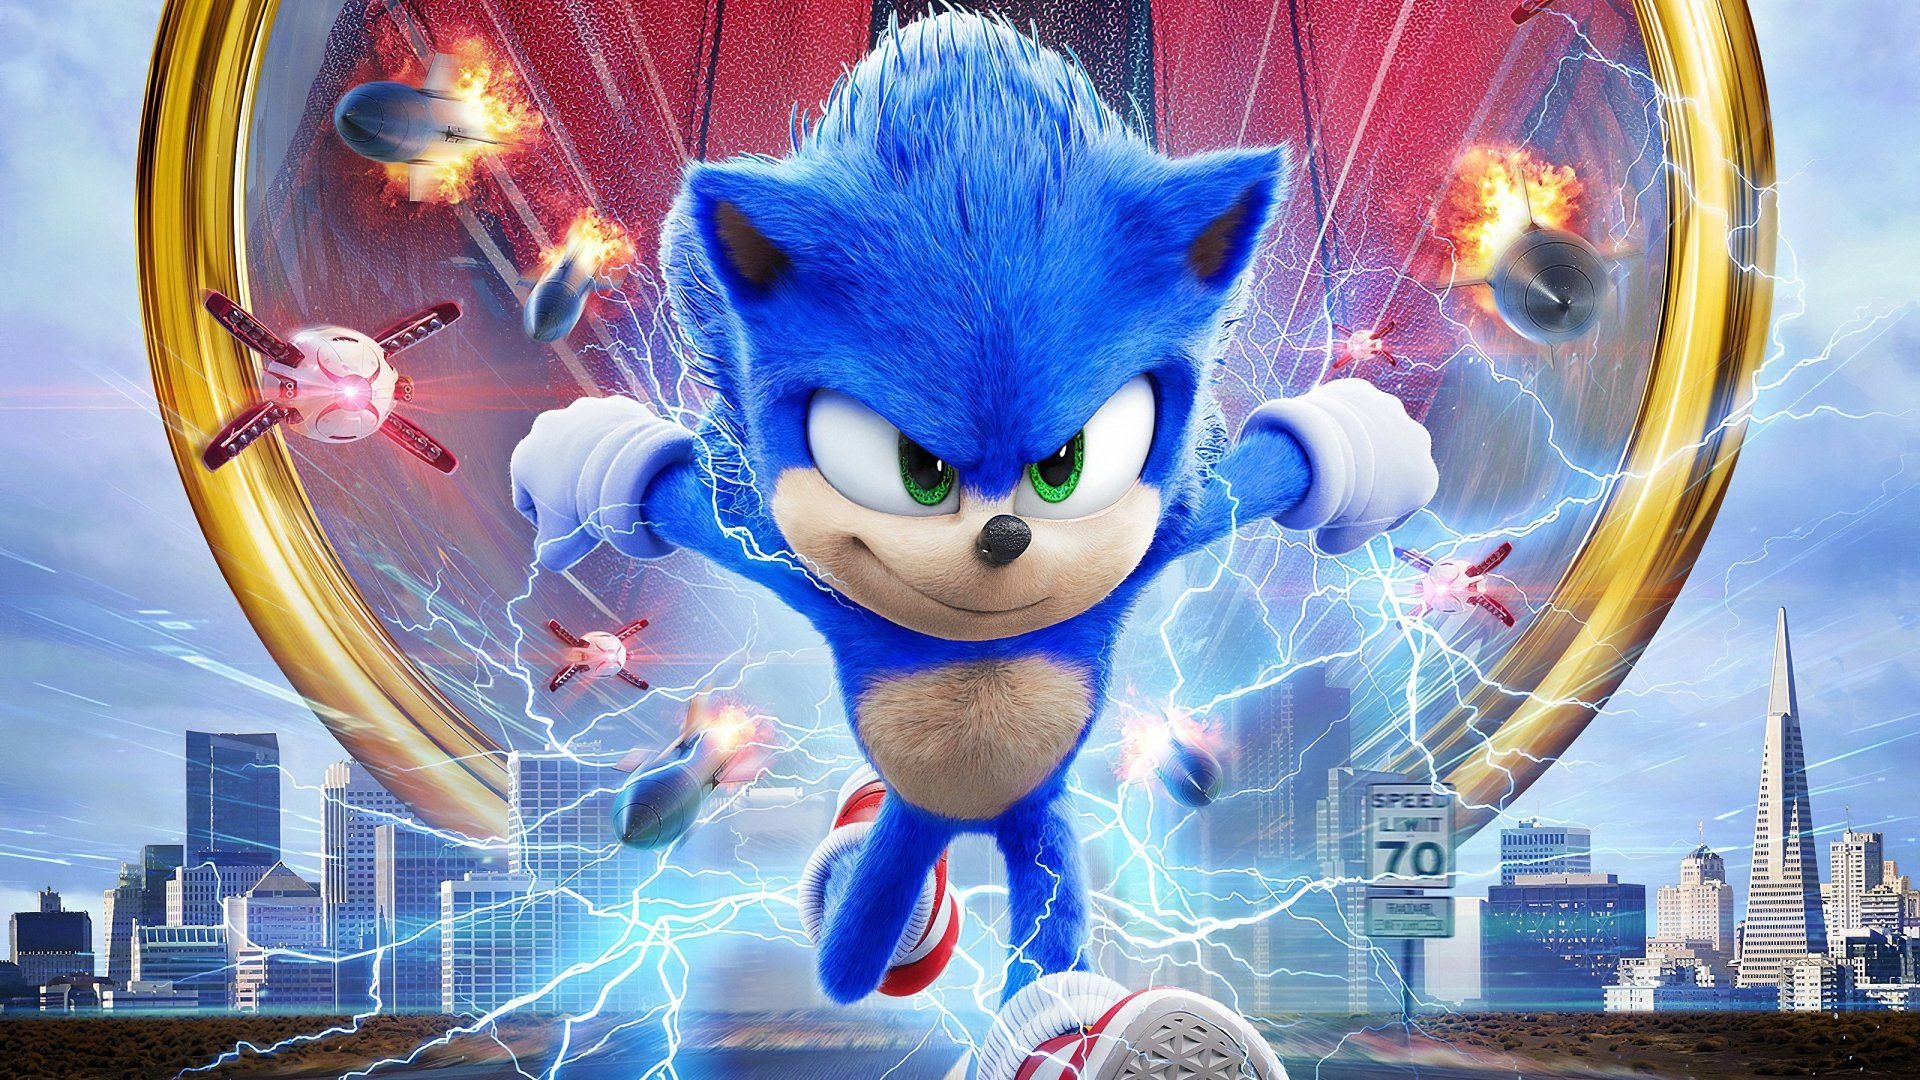 Sonic running wallpapers, Sonic the Hedgehog, Fast-paced gameplay, Gaming backgrounds, 1920x1080 Full HD Desktop